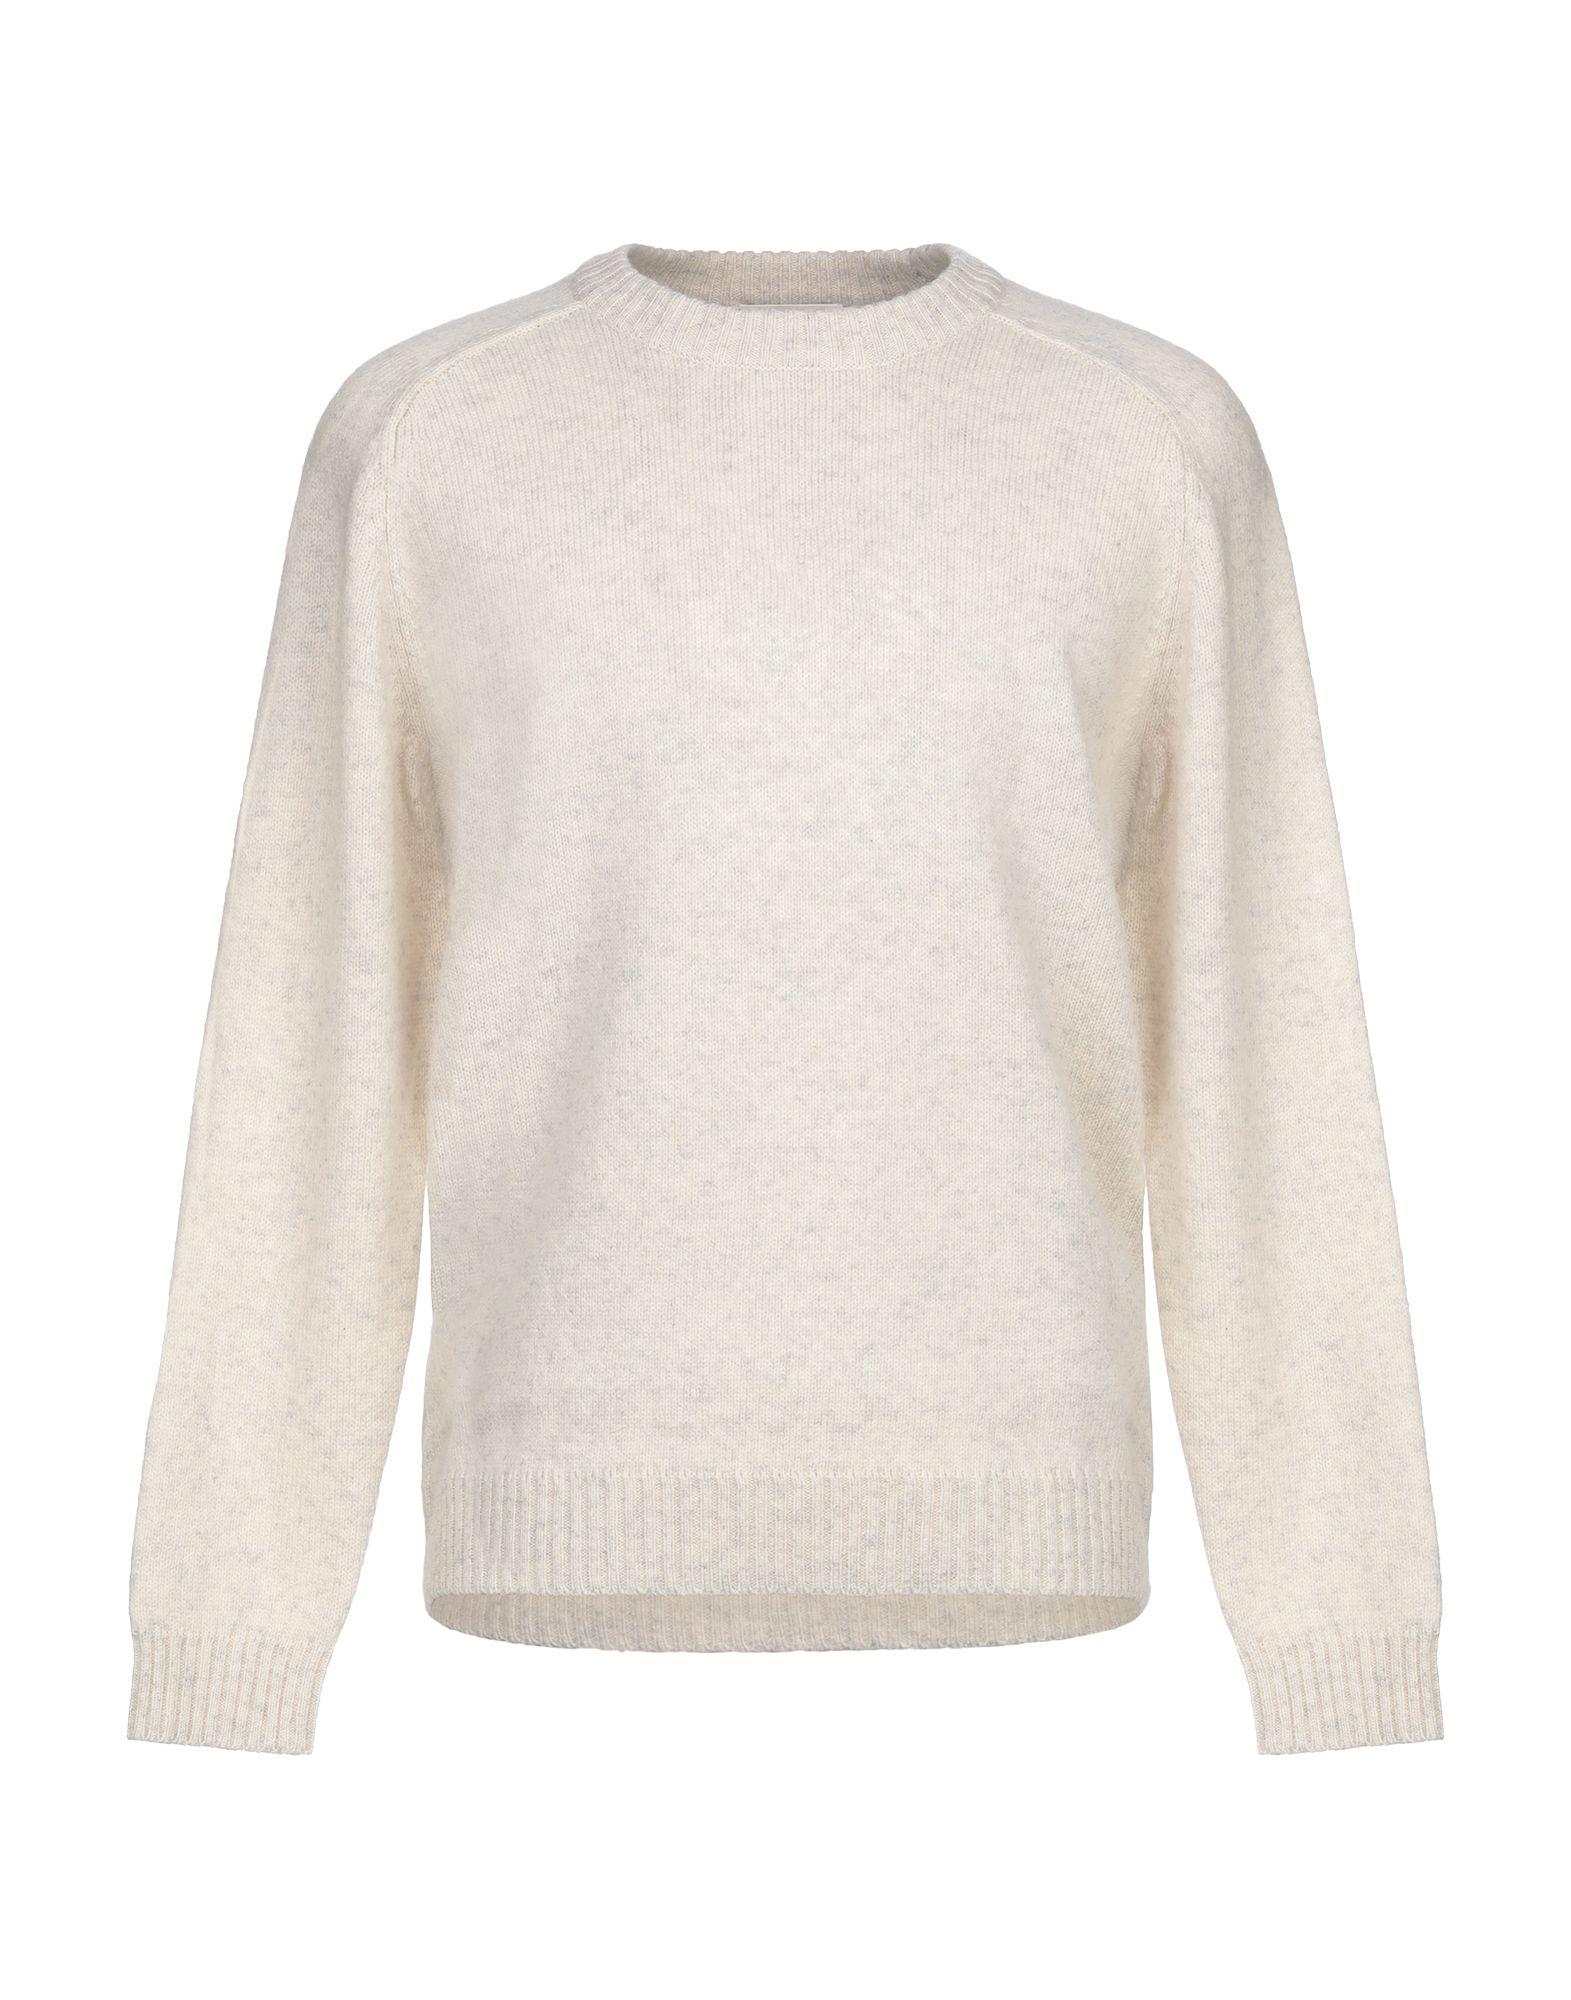 SELECTED Wool Sweater in Ivory (White) for Men - Lyst